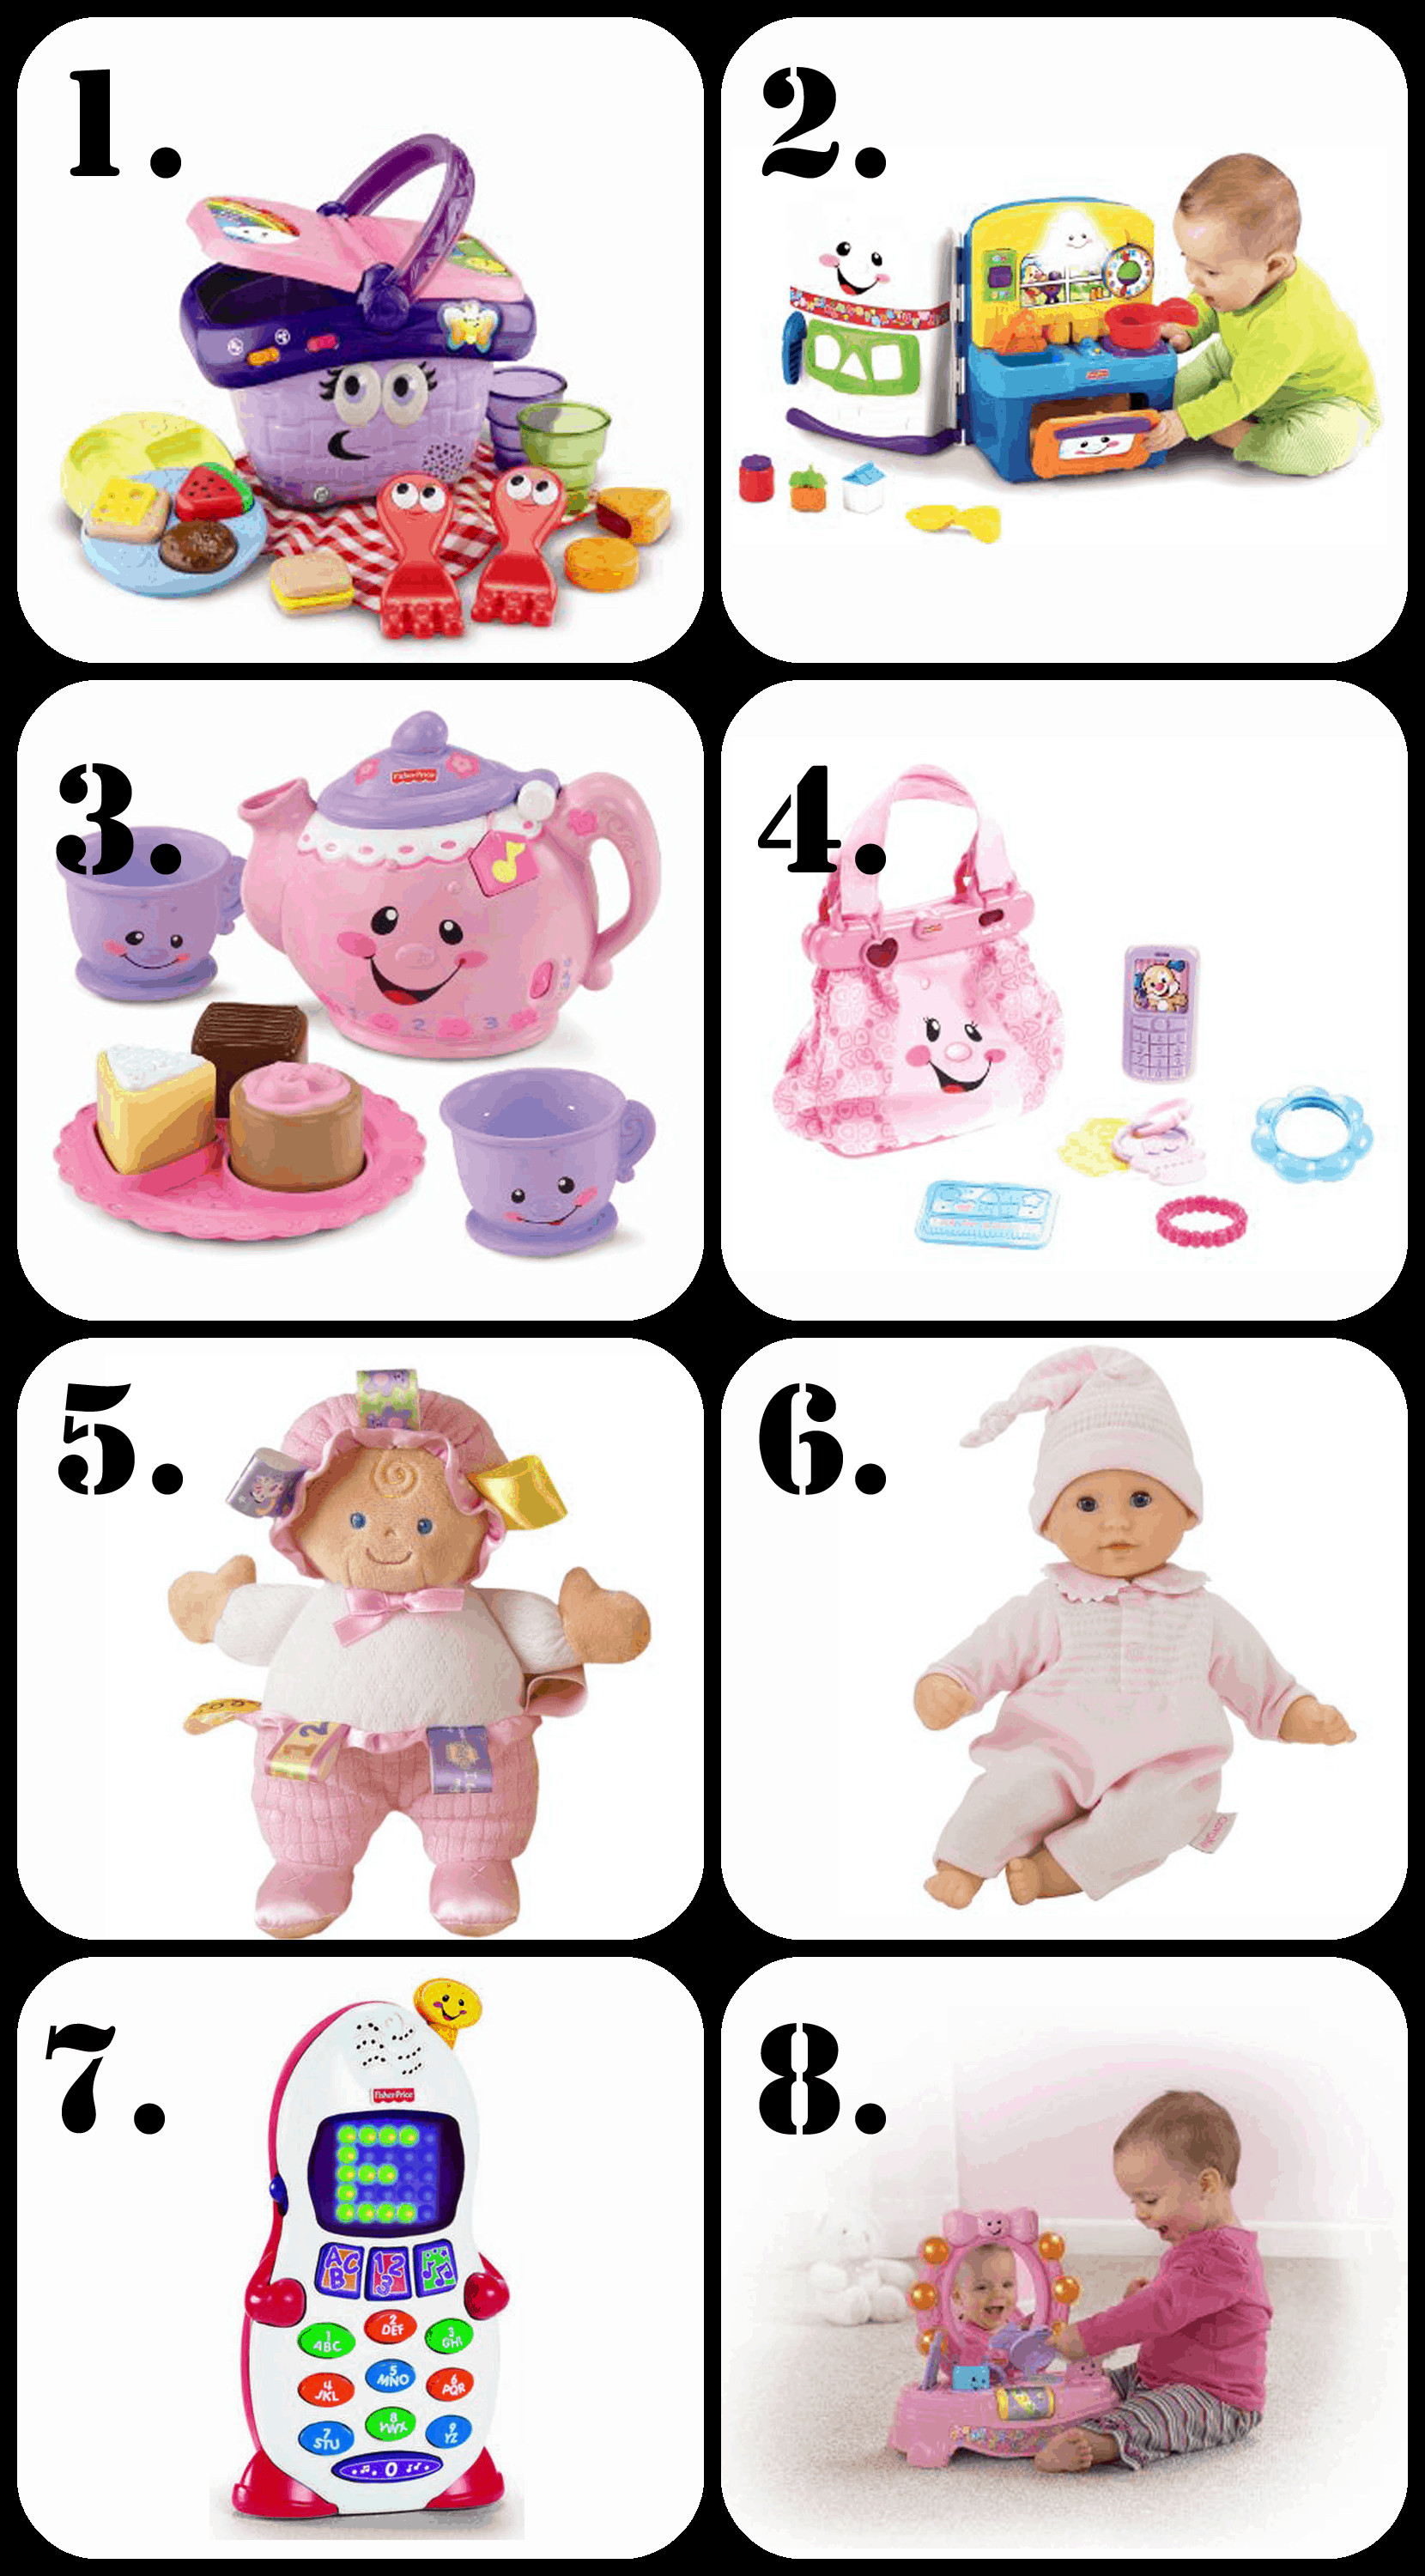 Gift Ideas For 2 Year Old Baby Girl
 The Ultimate List of Gift Ideas for a 1 Year Old Girl